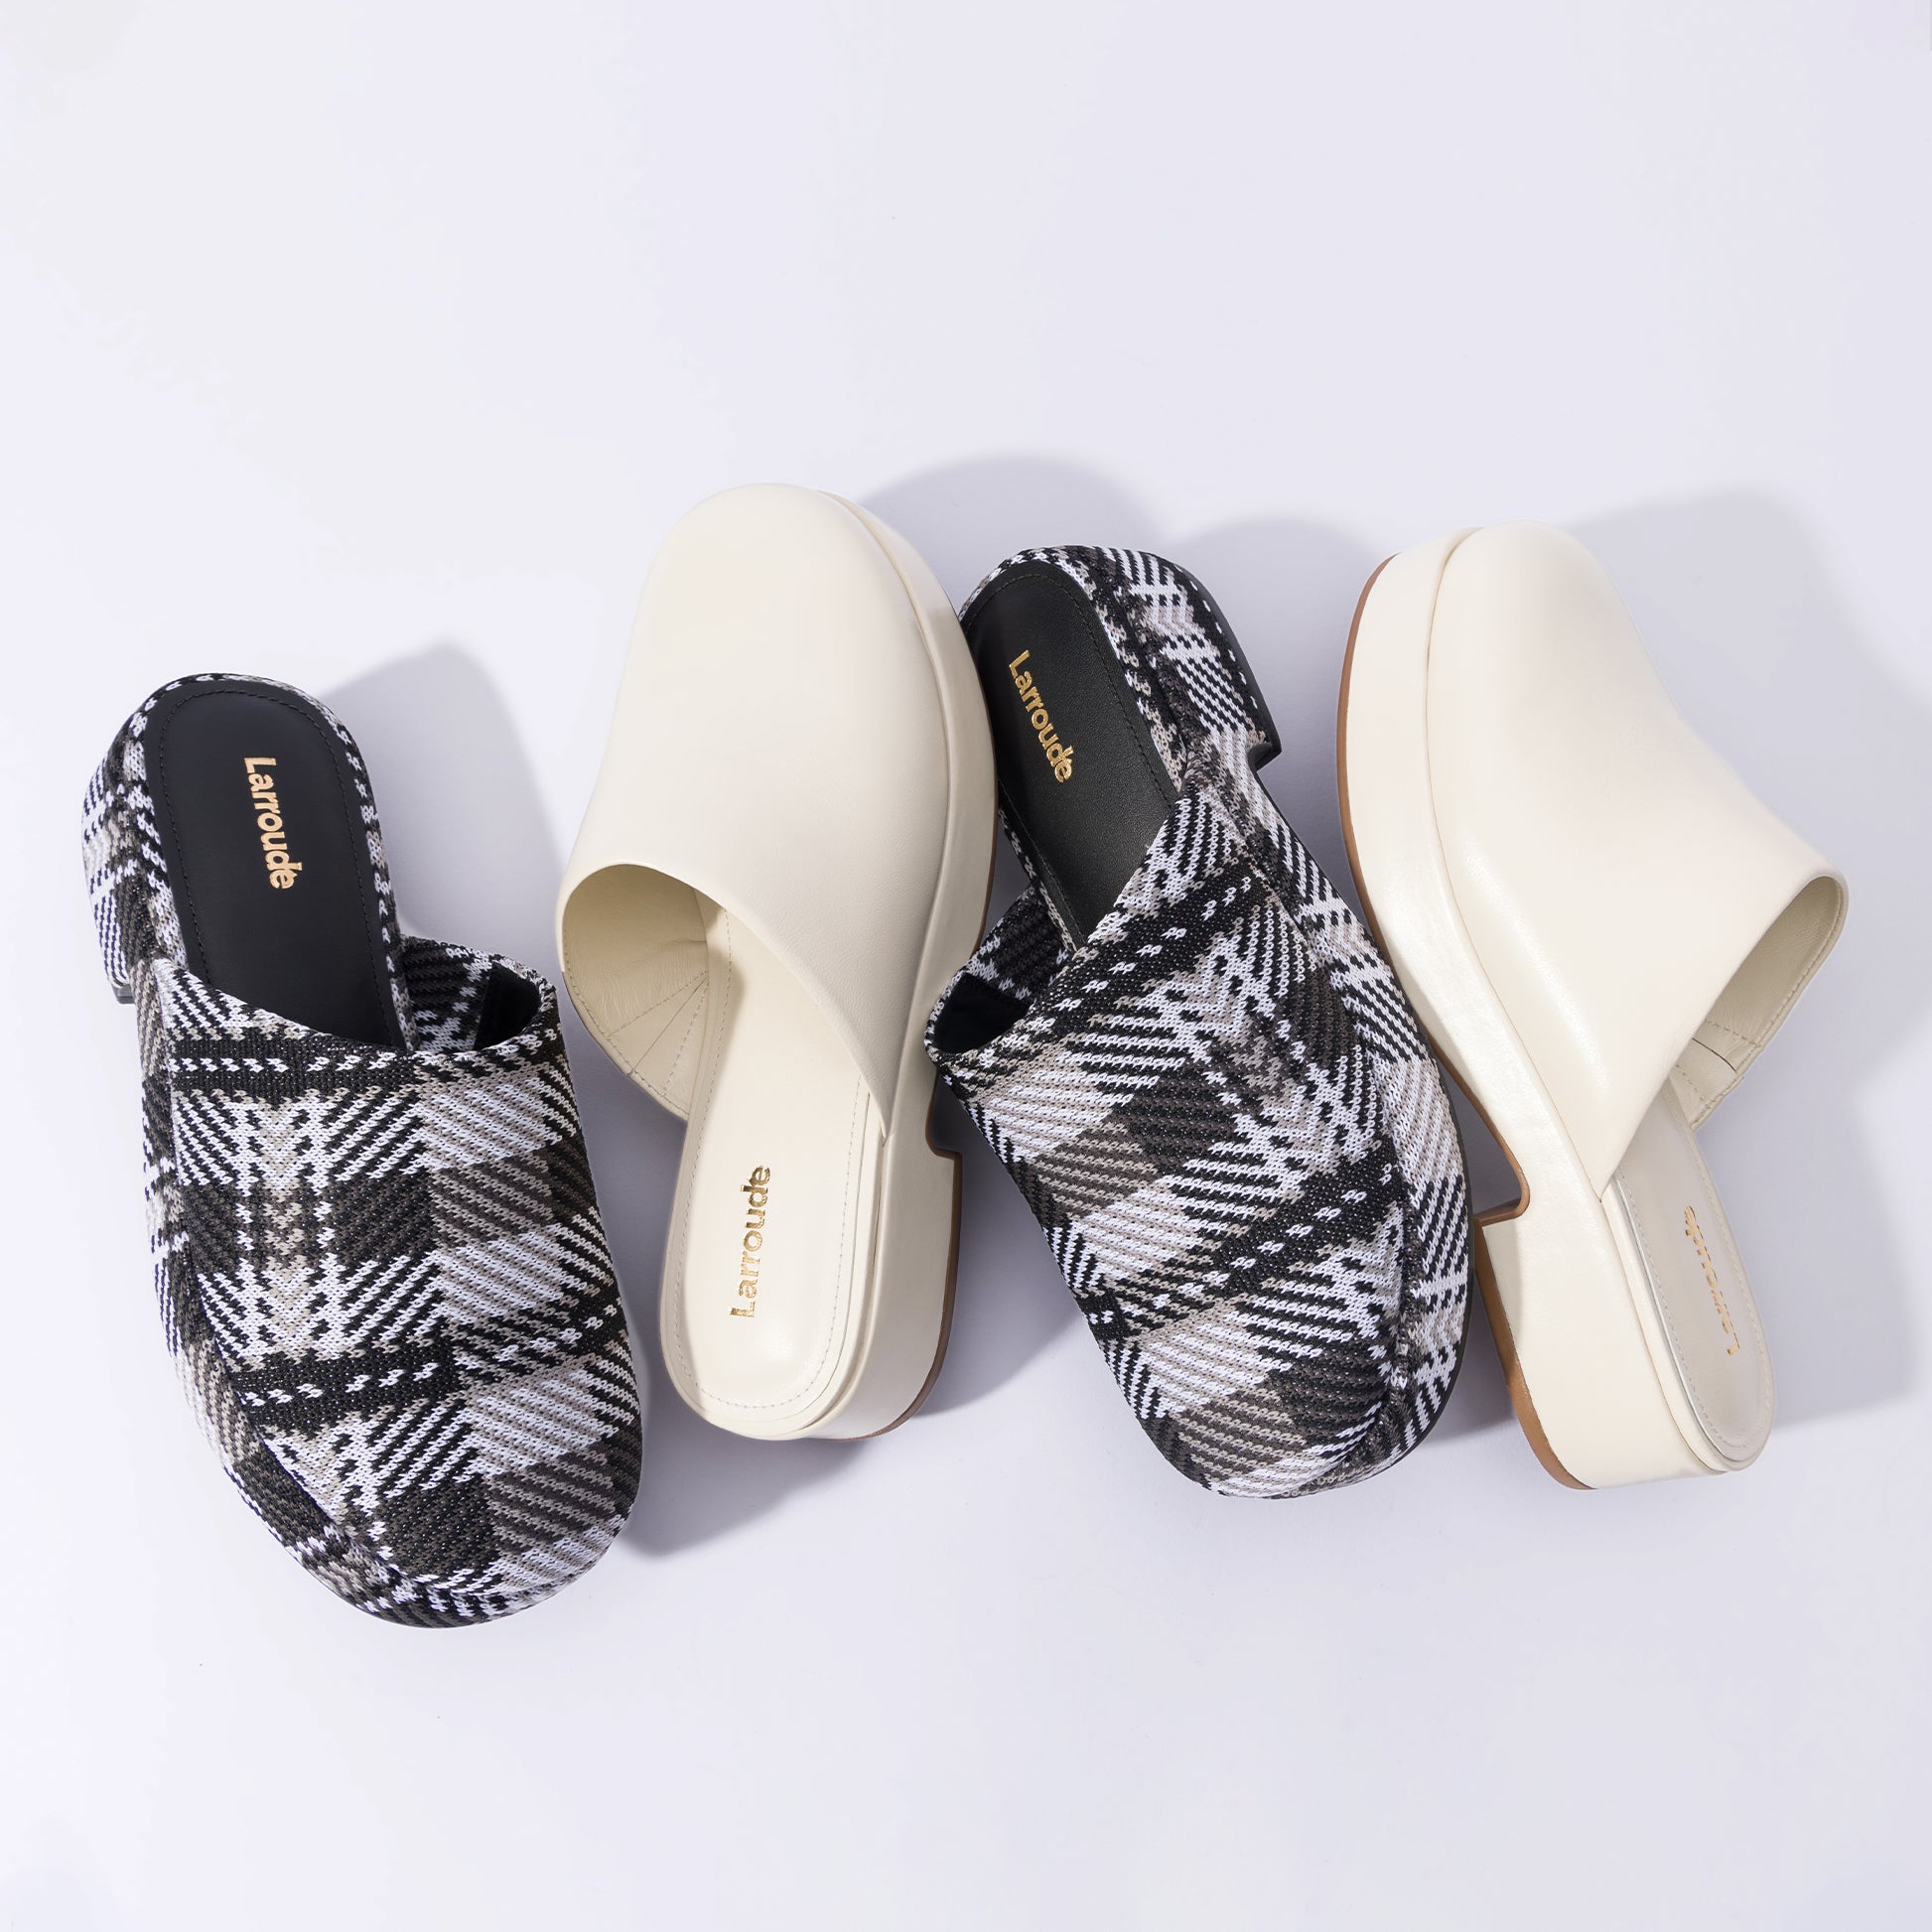 Miso Flatform Clog In Black and White Plaid Knit